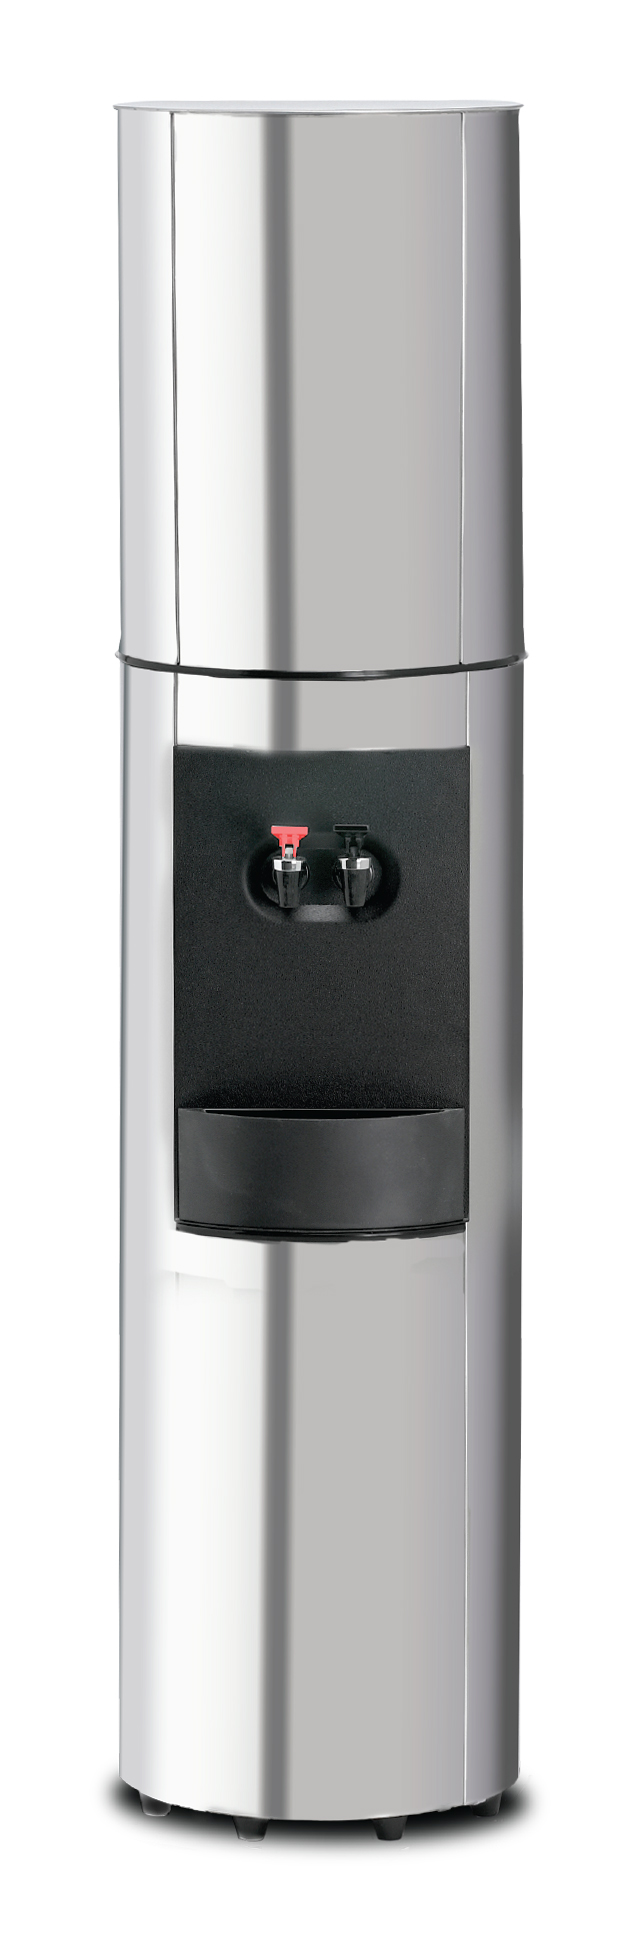 S2 Stainless Steel Bottleless Water Cooler with Hot & Cold Water